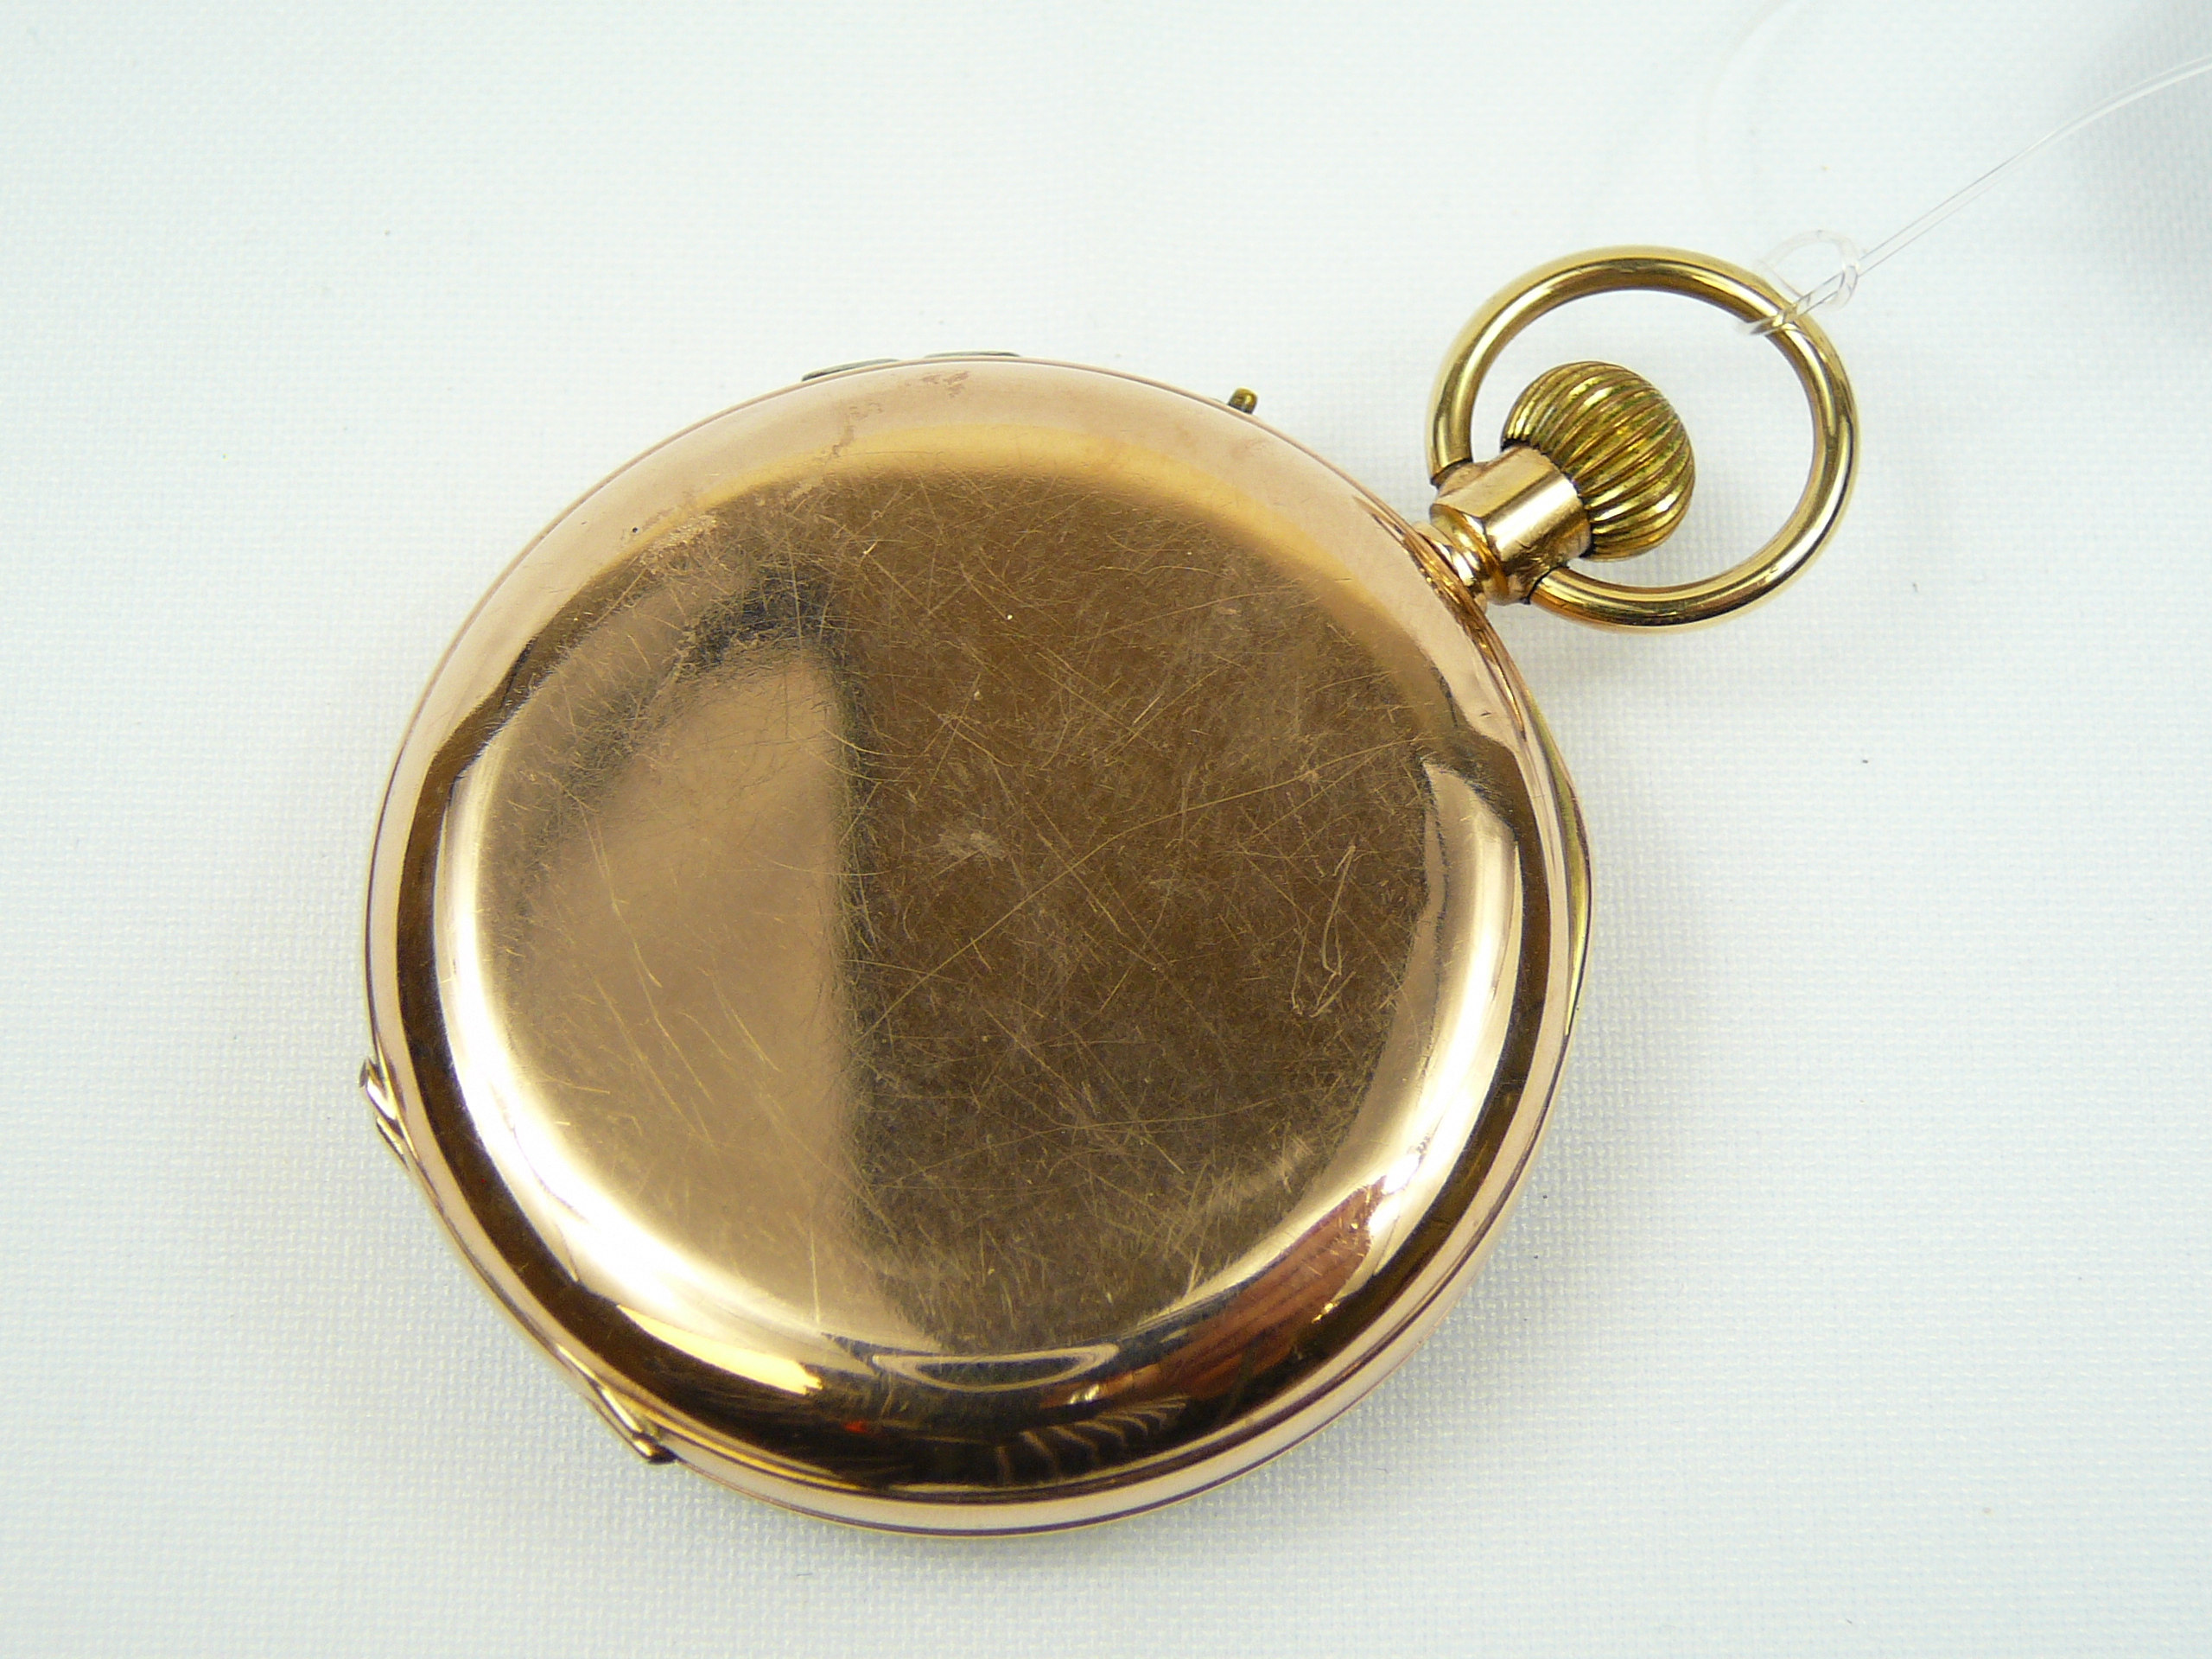 Gents gold pocket watch - Image 2 of 5